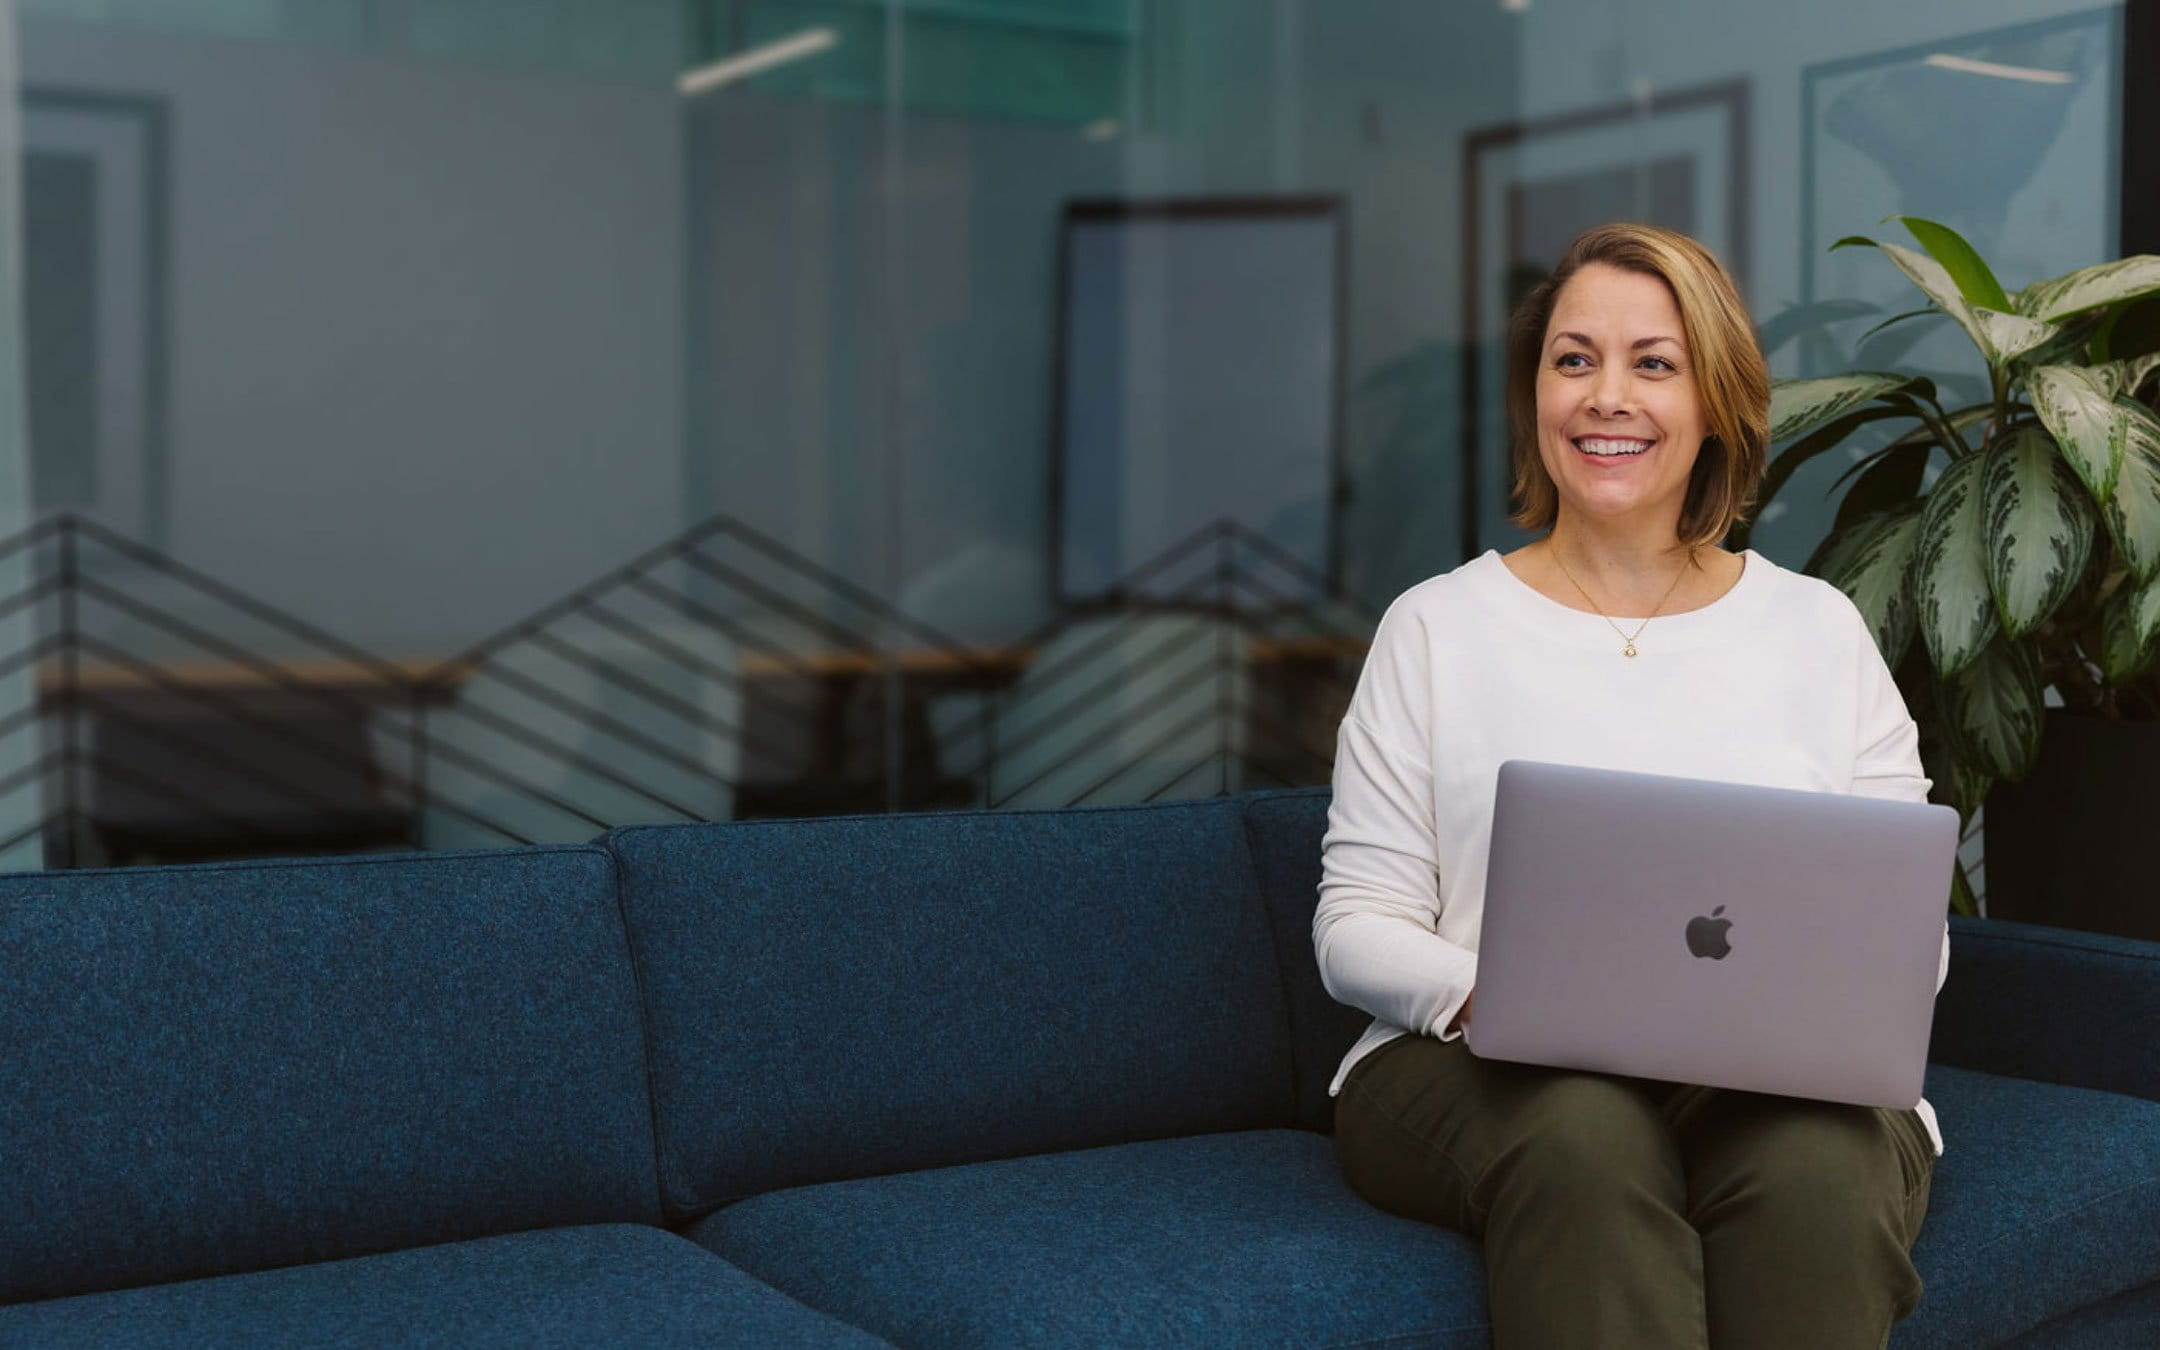 Woman looking happy with laptop in ecommerce workspace